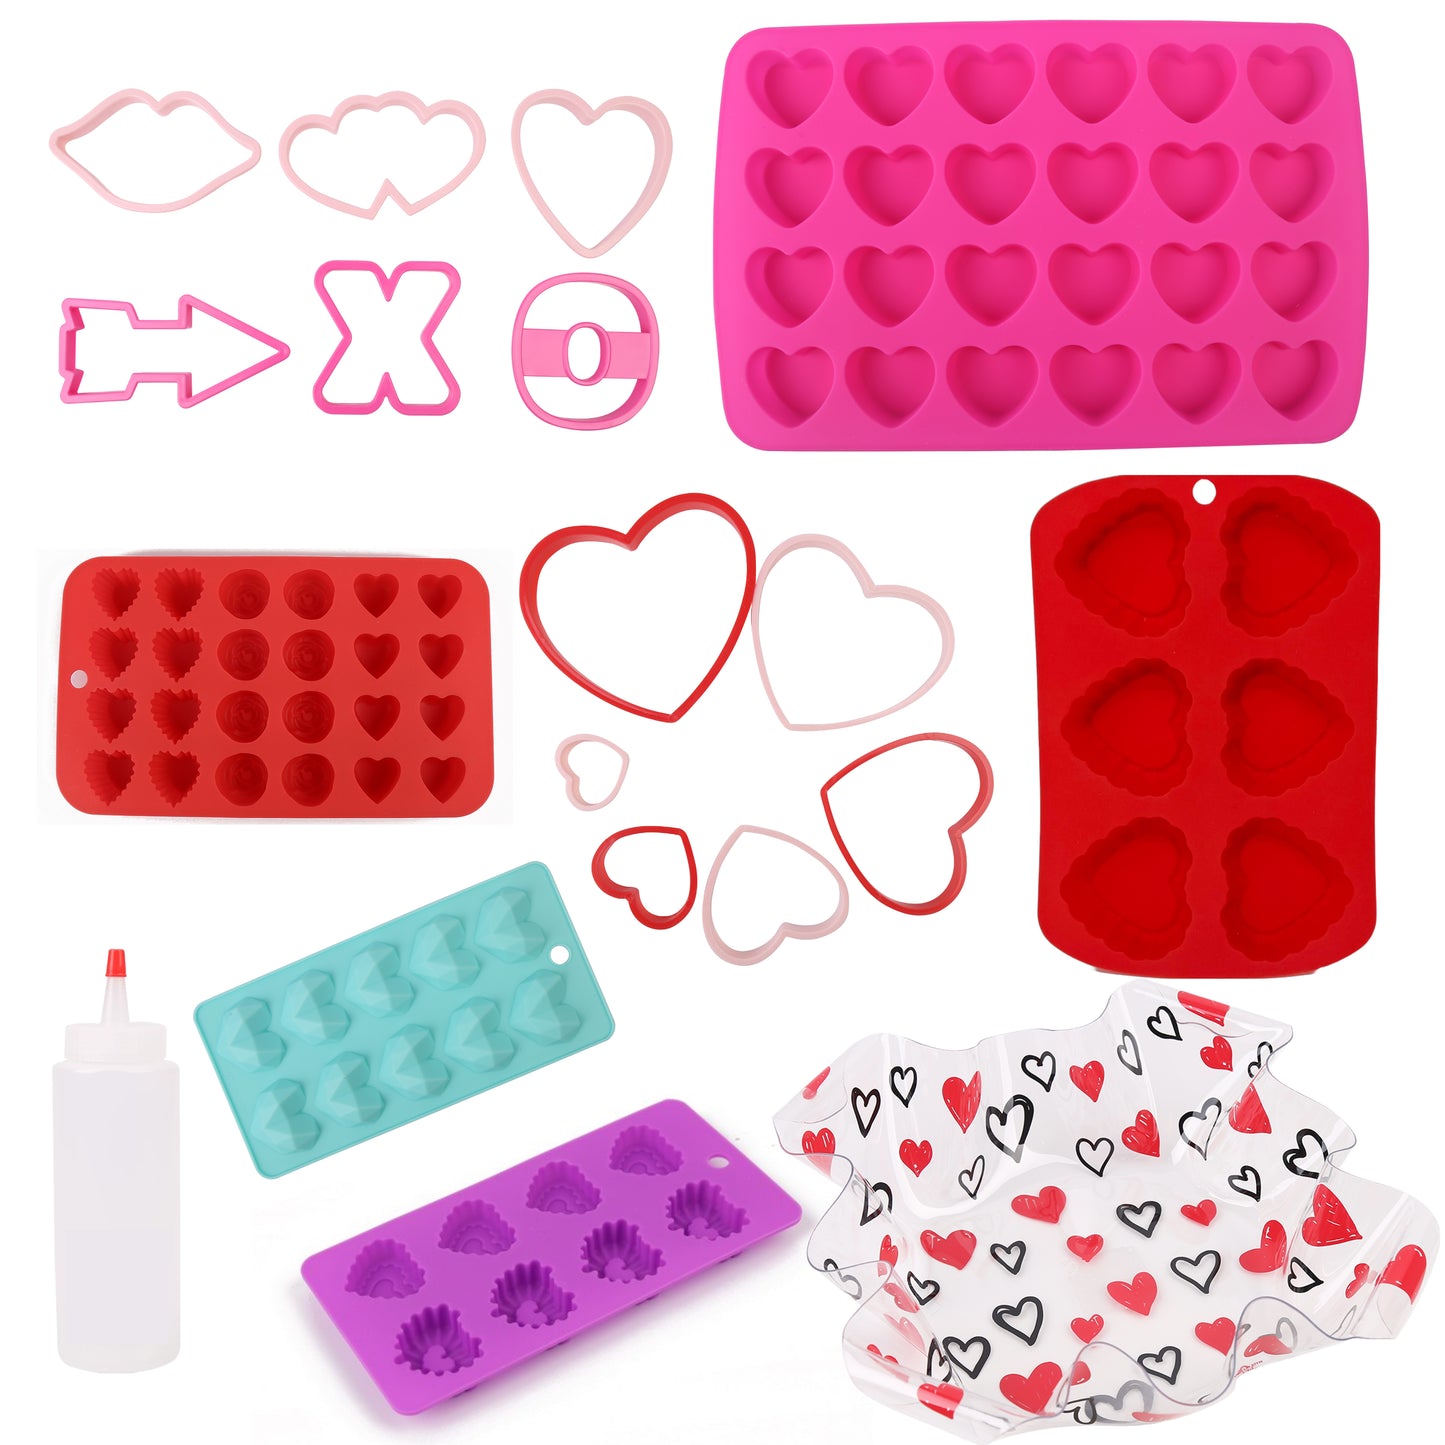 Cheep N Cheerful 19 Pc Deluxe Valentine Silicone Baking Kit, Silicone Molds, Cookie Cutters, Squeeze Bottle, Ruffled Bowl